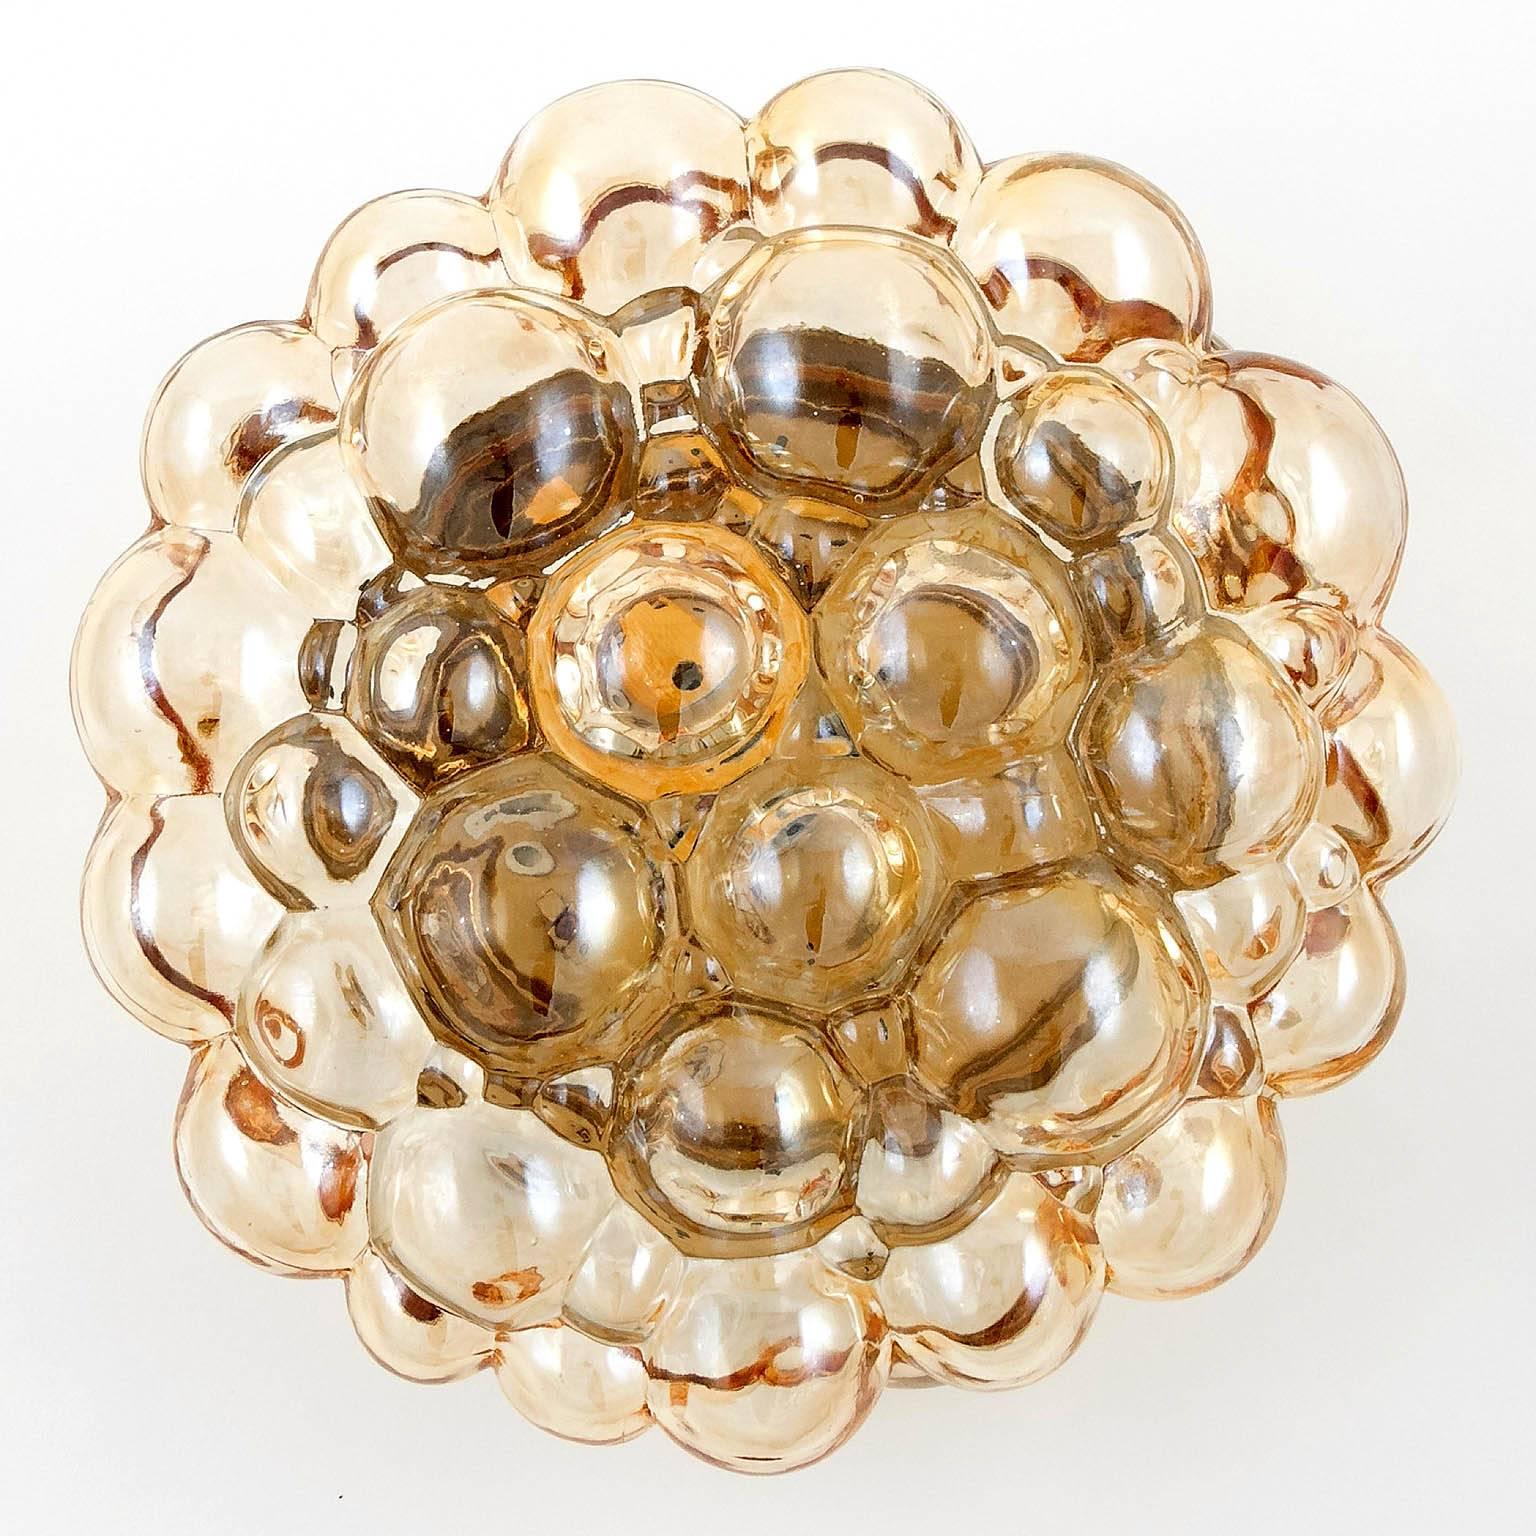 A pair of round vintage amber bubble glass lights, manufactured in Mid-Century.
They can be used as wall sconces or flush mount lamps. 
The lights were designed in the 1960s by Helena Tynell & Heinrich Gatenbrink for Glashütte Limburg, Germany.